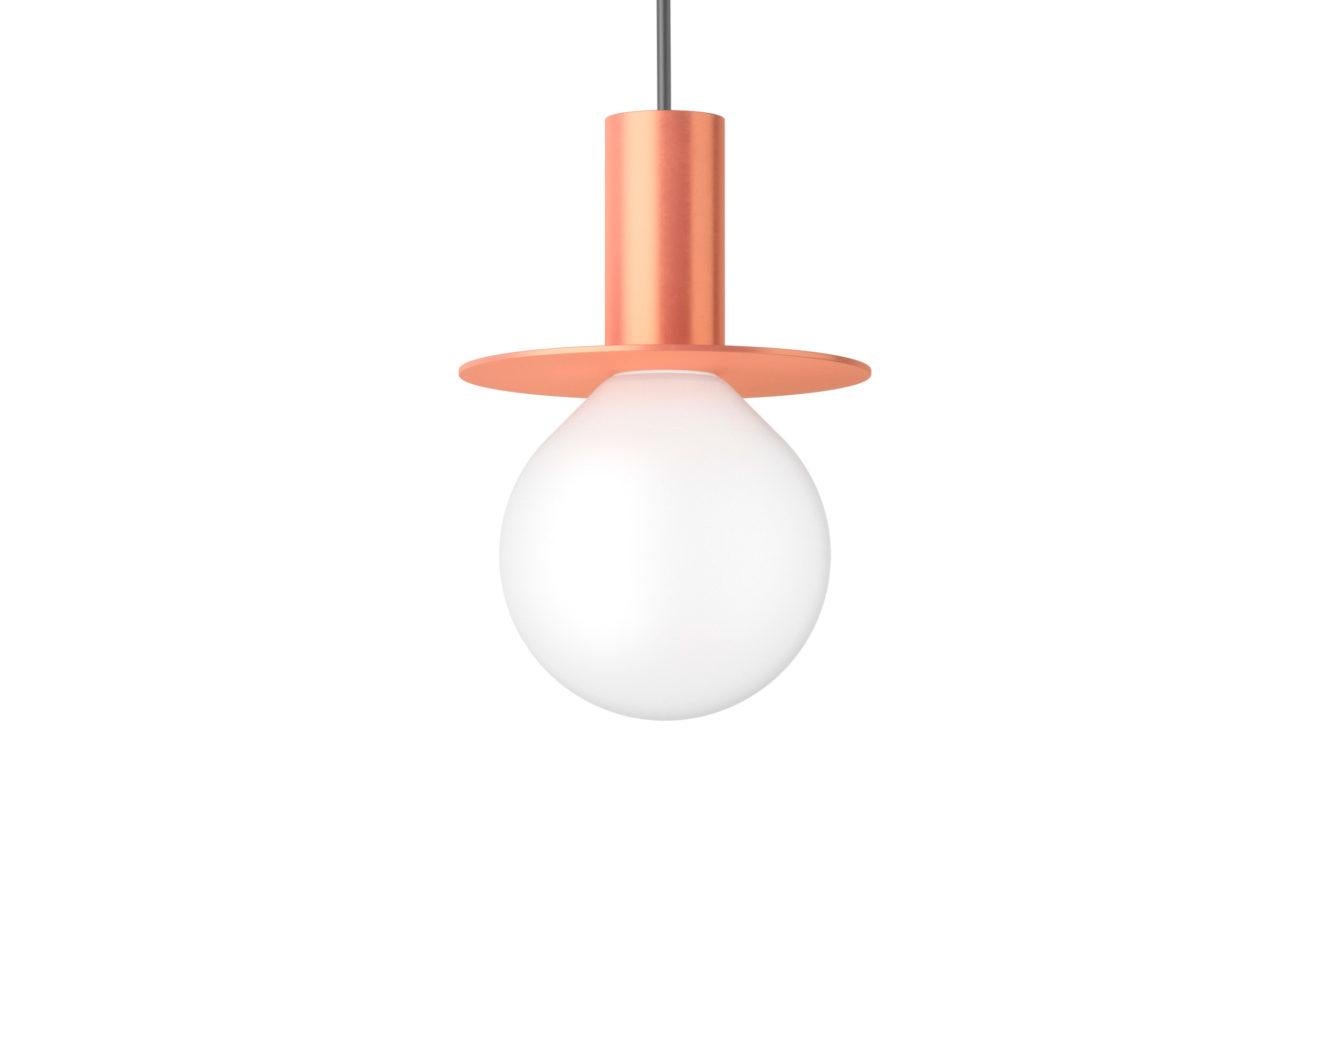 Disc 25 is a Minimalist pendant lamp design by Wishnya Design Studio.
Copper finish. 

Measures: D 25cm
LED G9 60W 110-220V - US compatible
Dimmable
Adjustable wire

Two sizes available 
Three finishes available: copper, brass, aluminum.